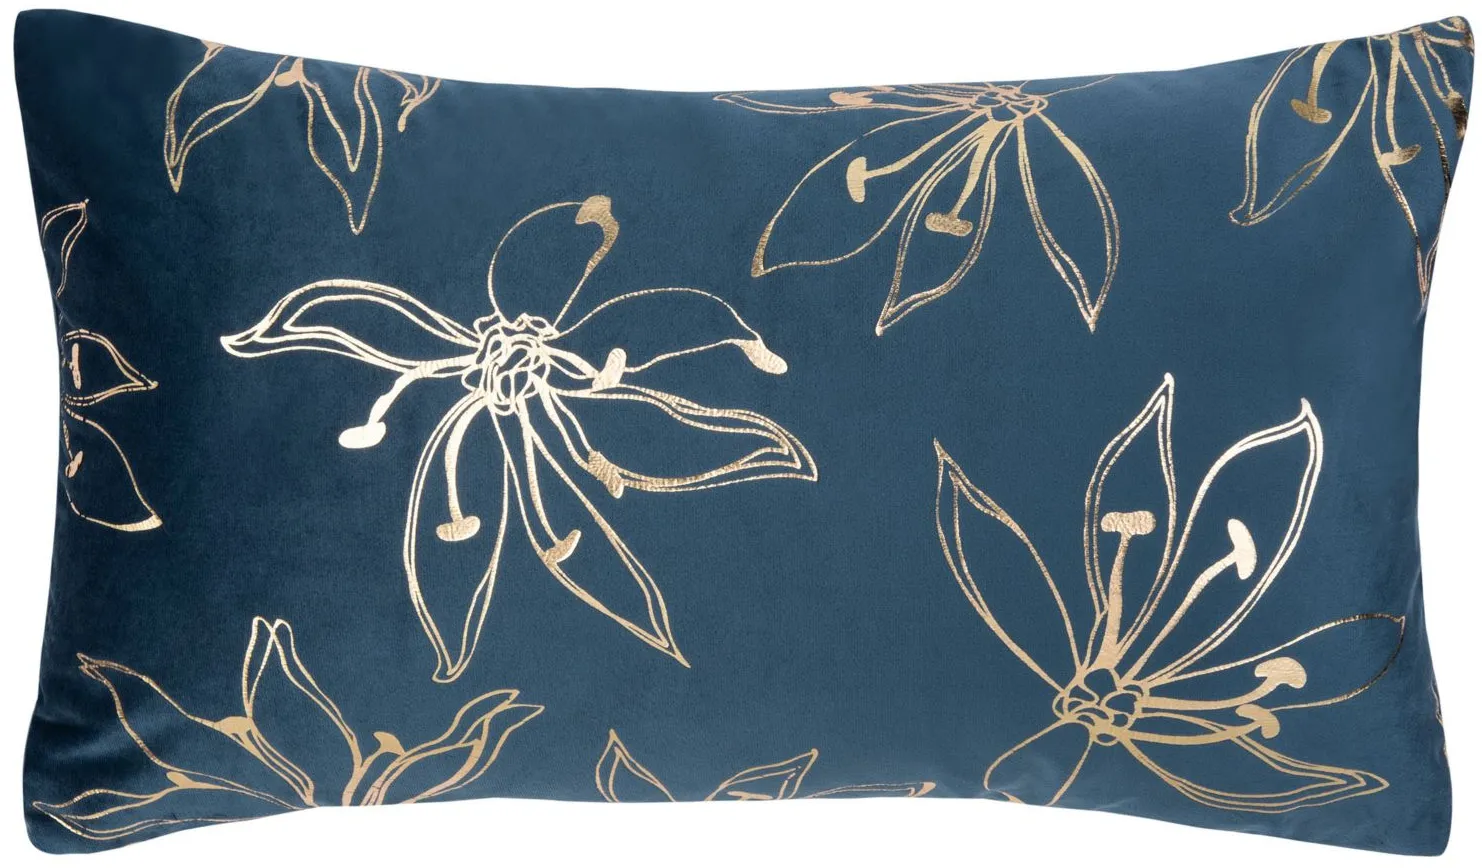 Embellished Yari Accent Pillow in Royal Blue/Tan by Safavieh